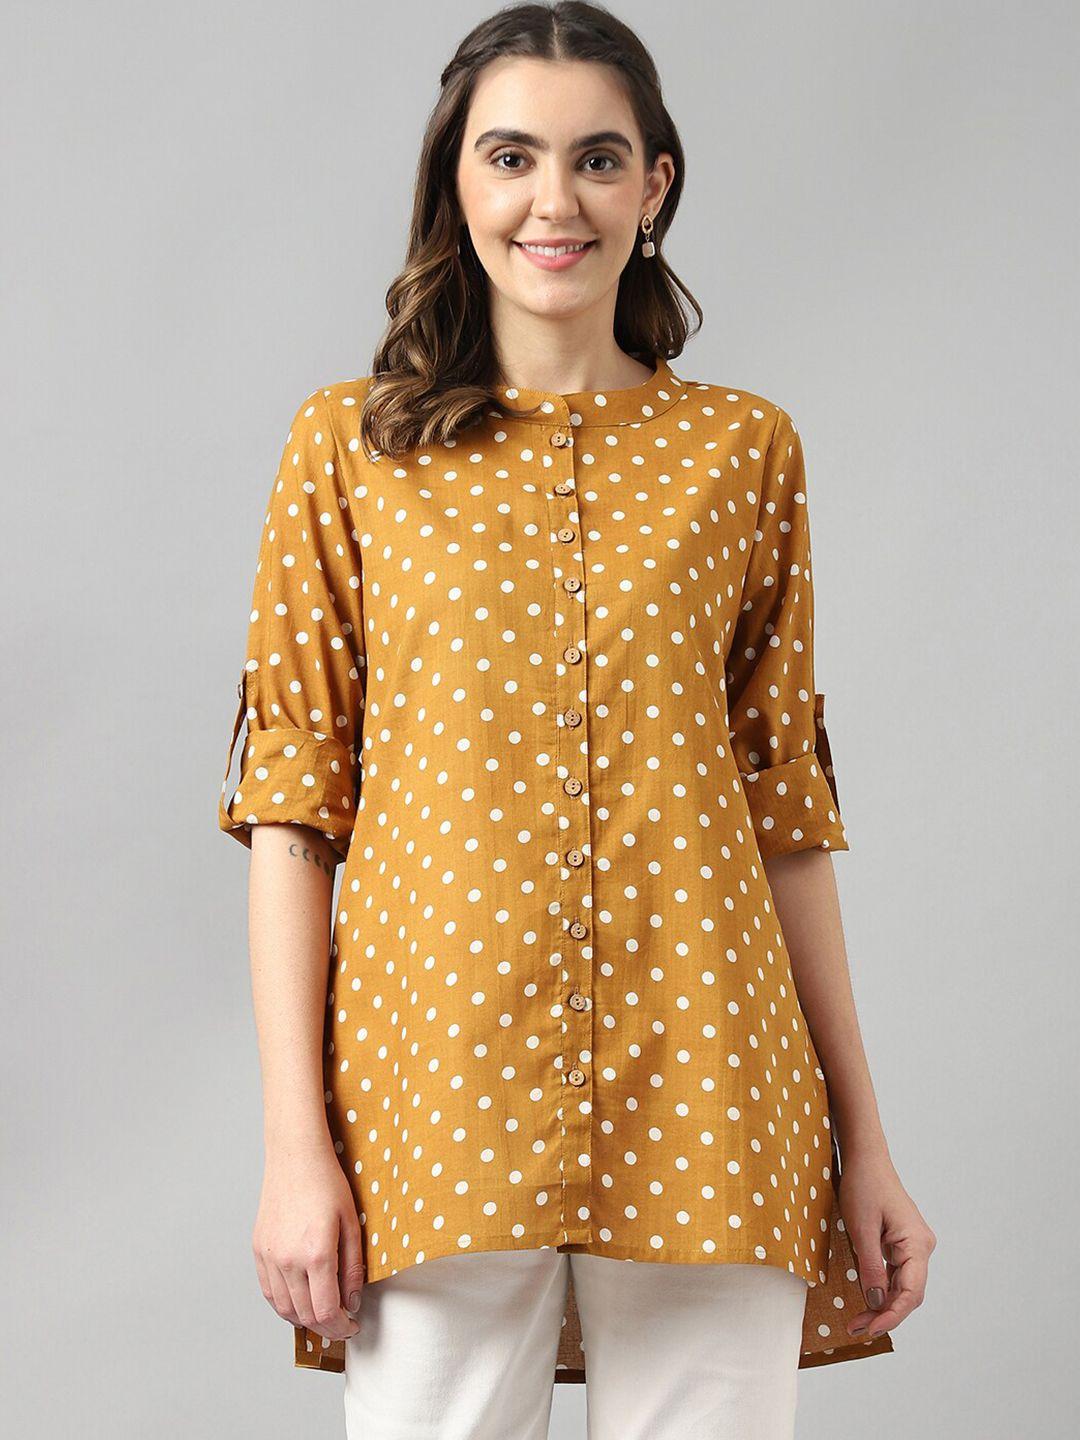 deckedup polka dots print roll-up sleeves high-low cotton longline shirt style top